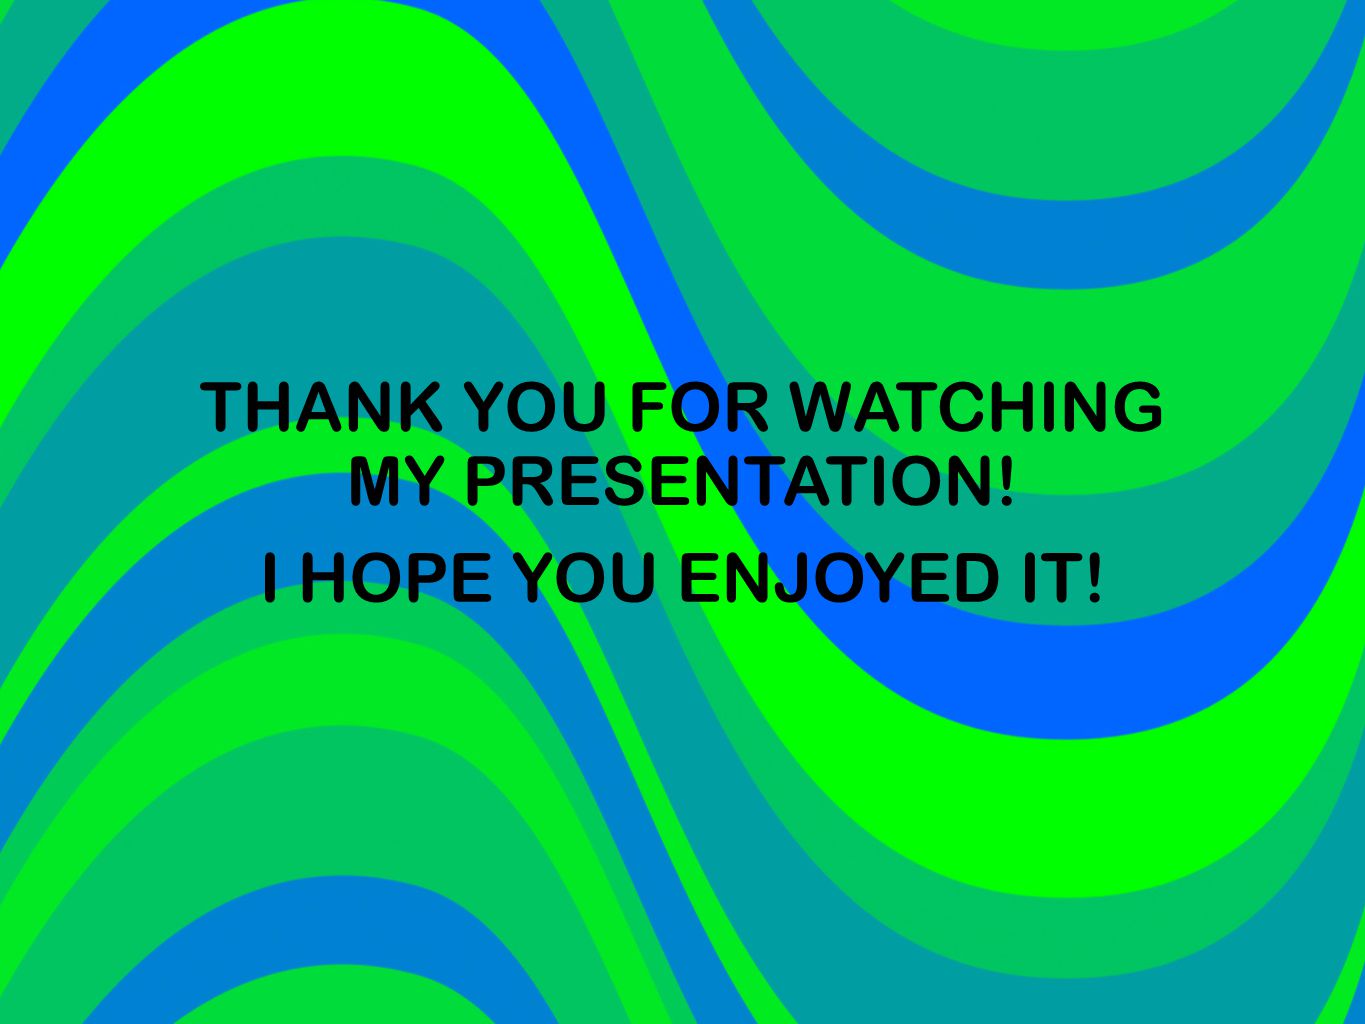 THANK YOU FOR WATCHING MY PRESENTATION!